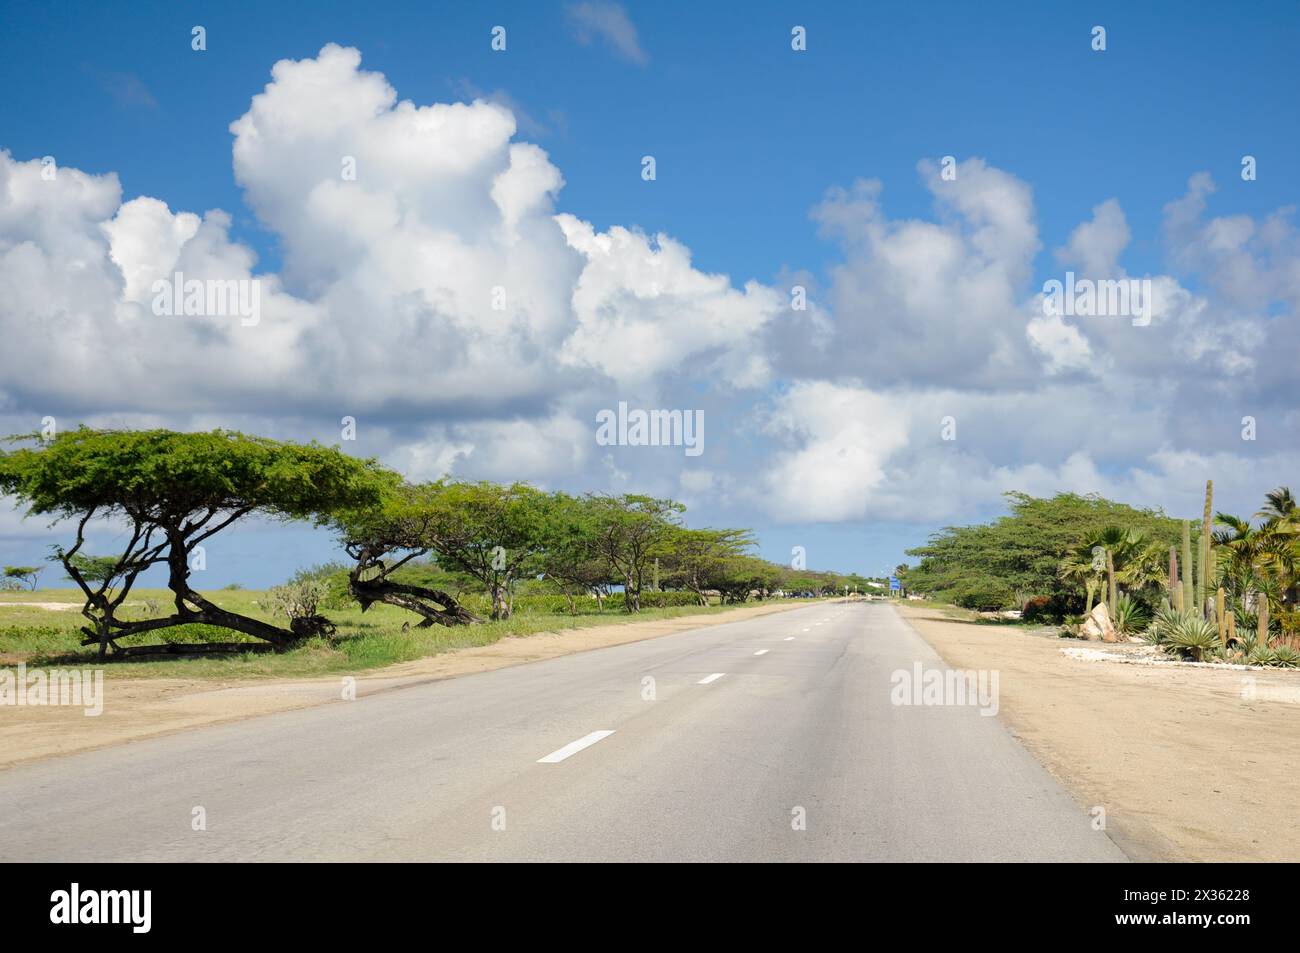 A road with trees on either side and a clear blue sky. The road is empty and there are no cars on it. Stock Photo